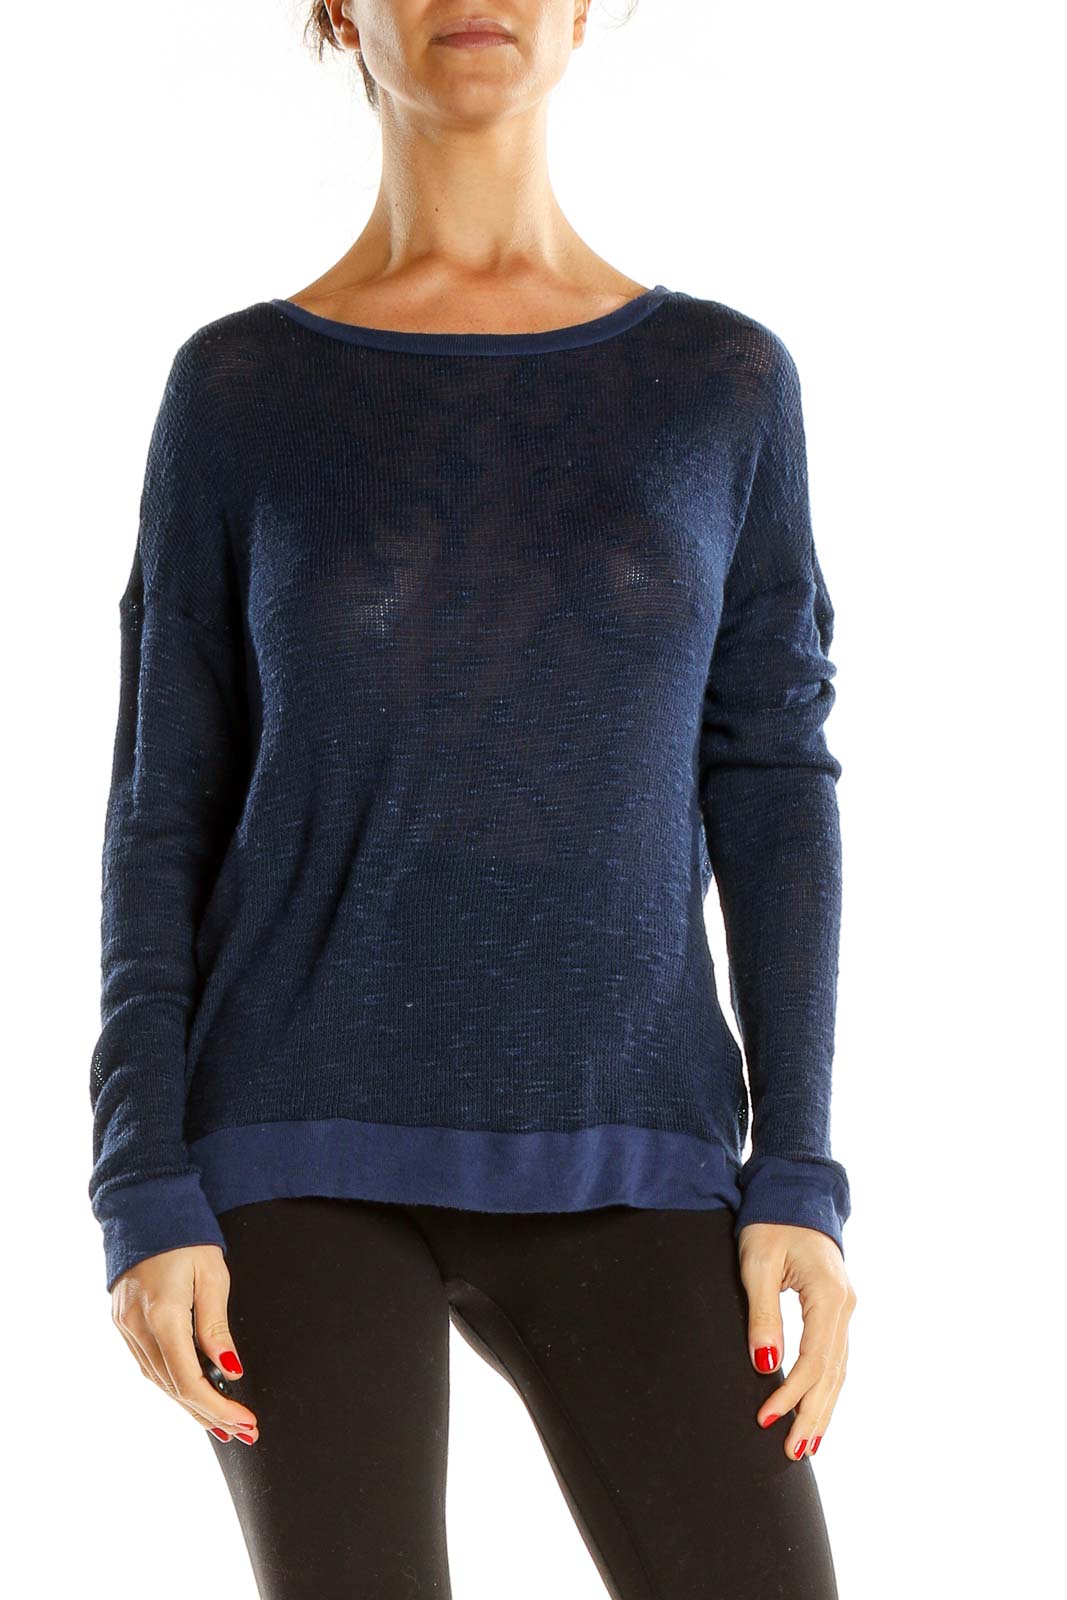 Blue Sheer All Day Wear Top Front